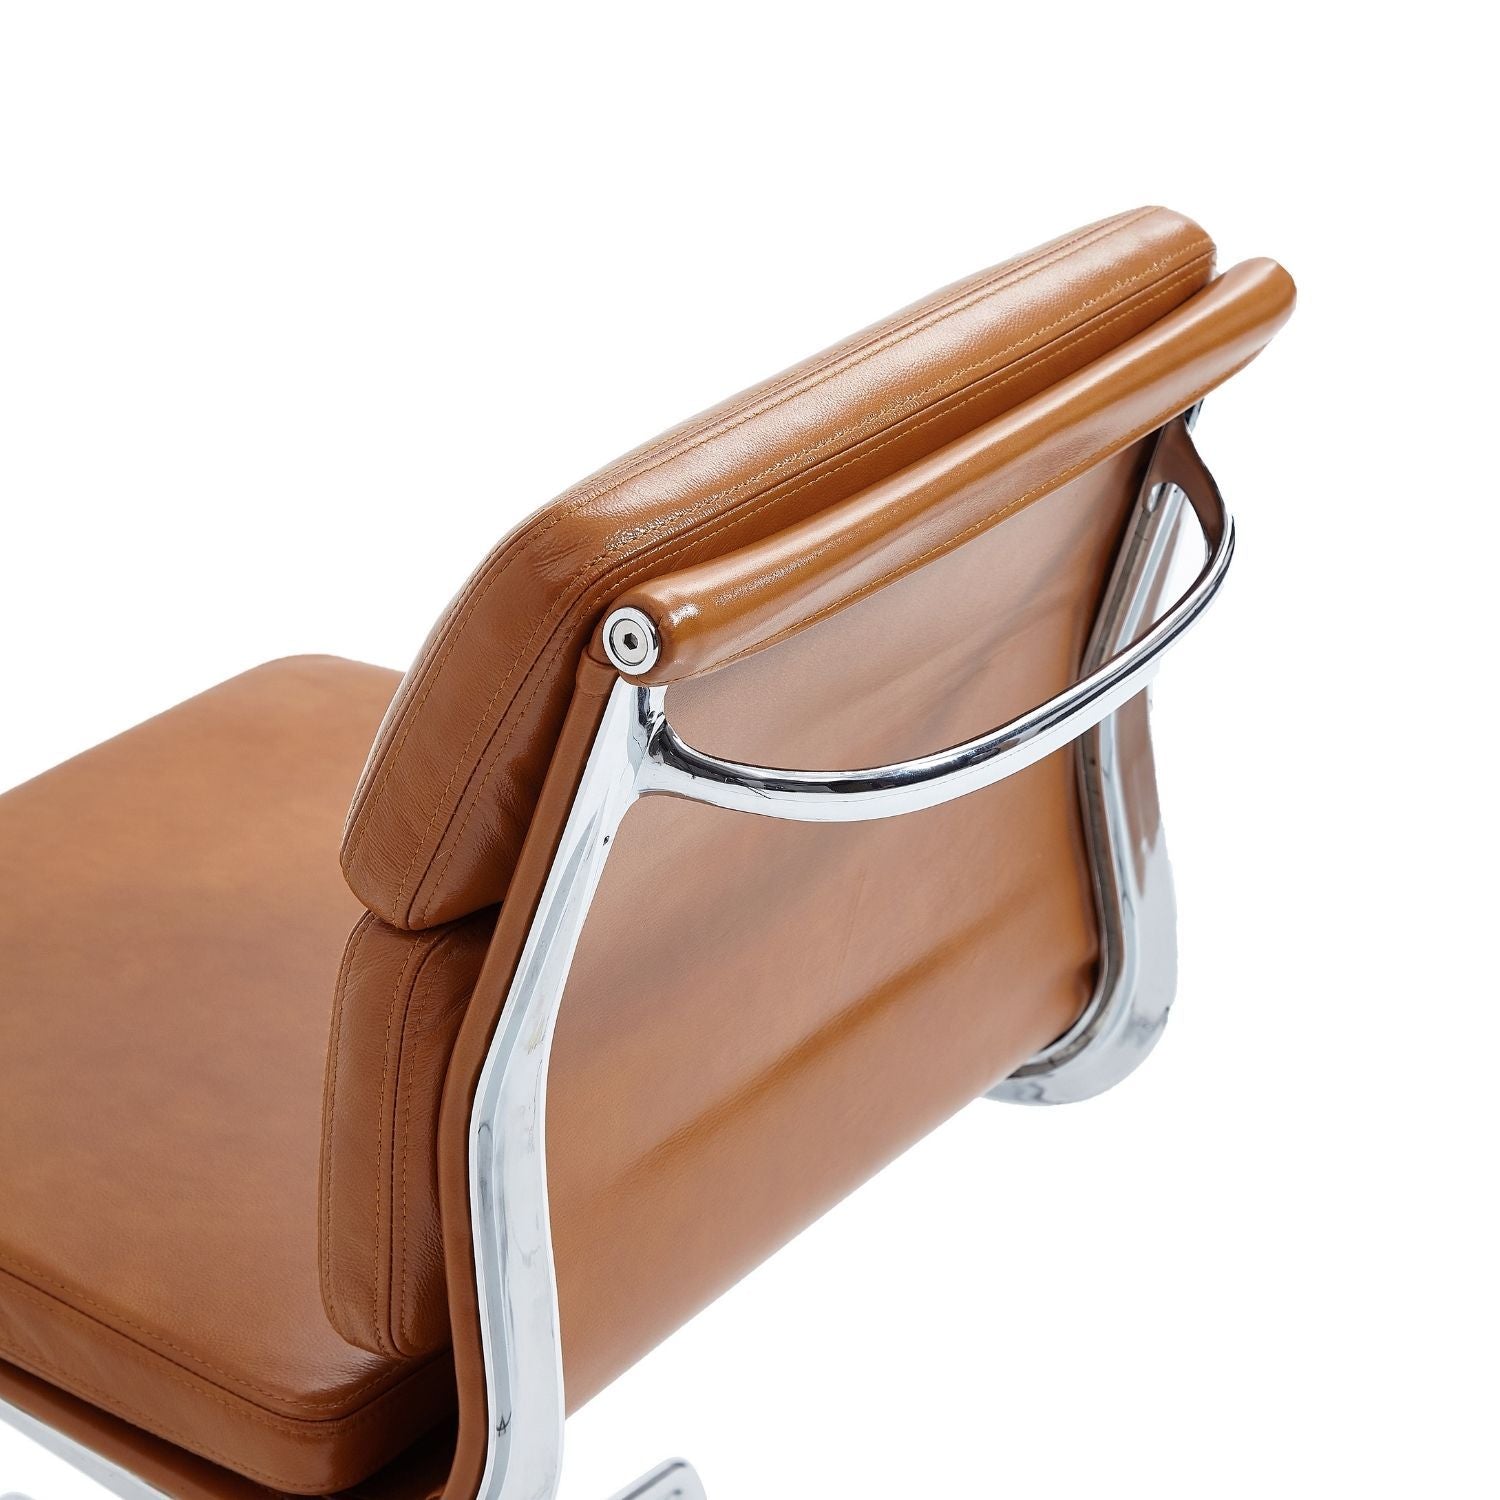 Jens Office Chair - Valyou 